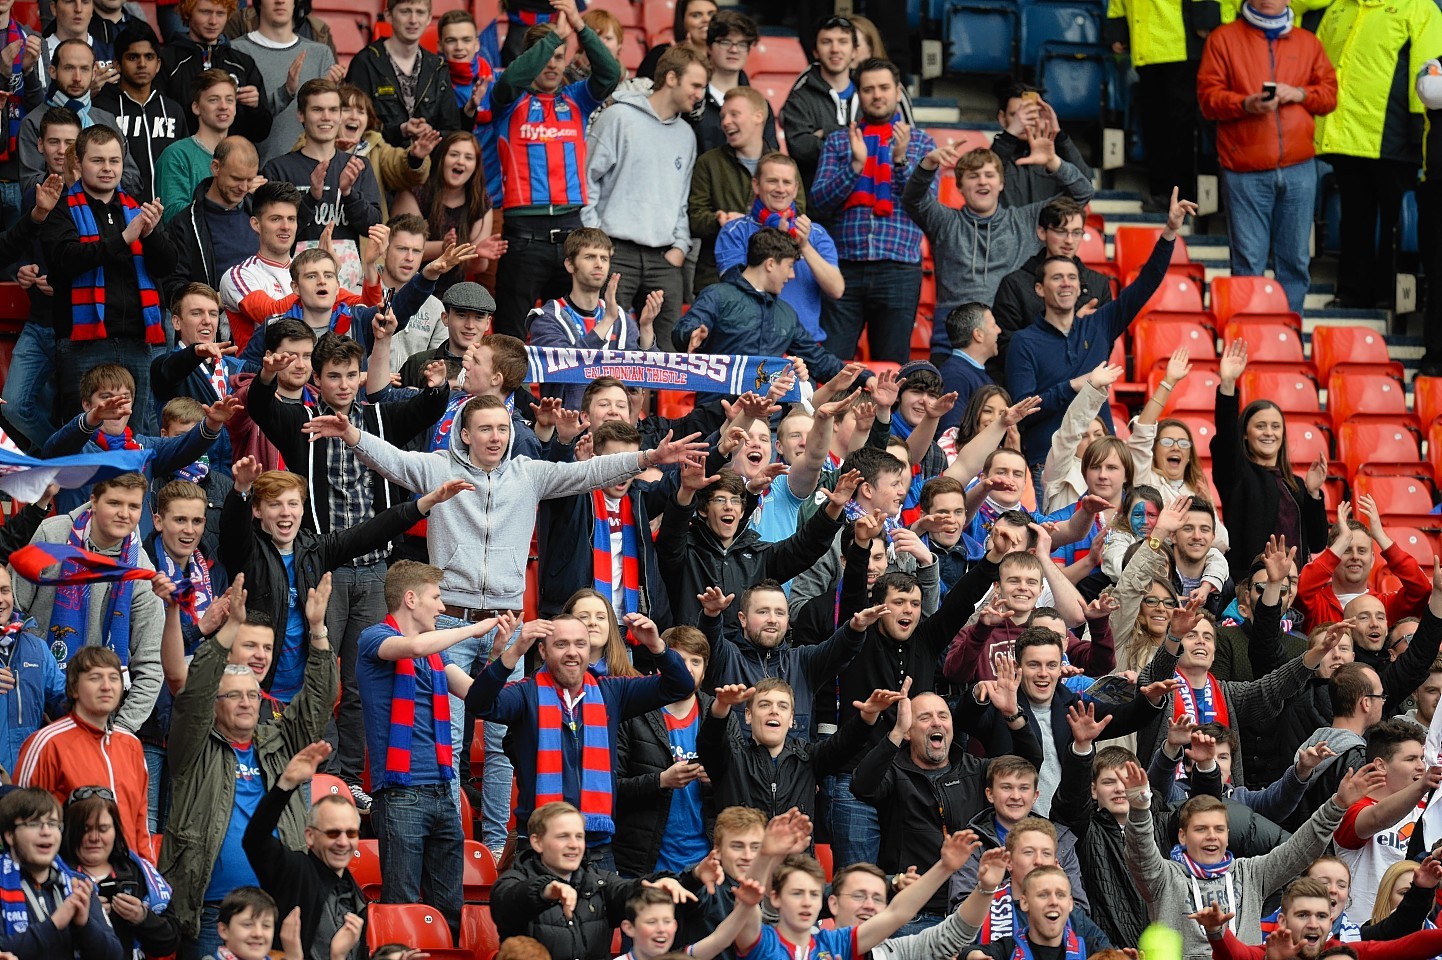 Inverness Caley Thiste fans celebrate their teams success